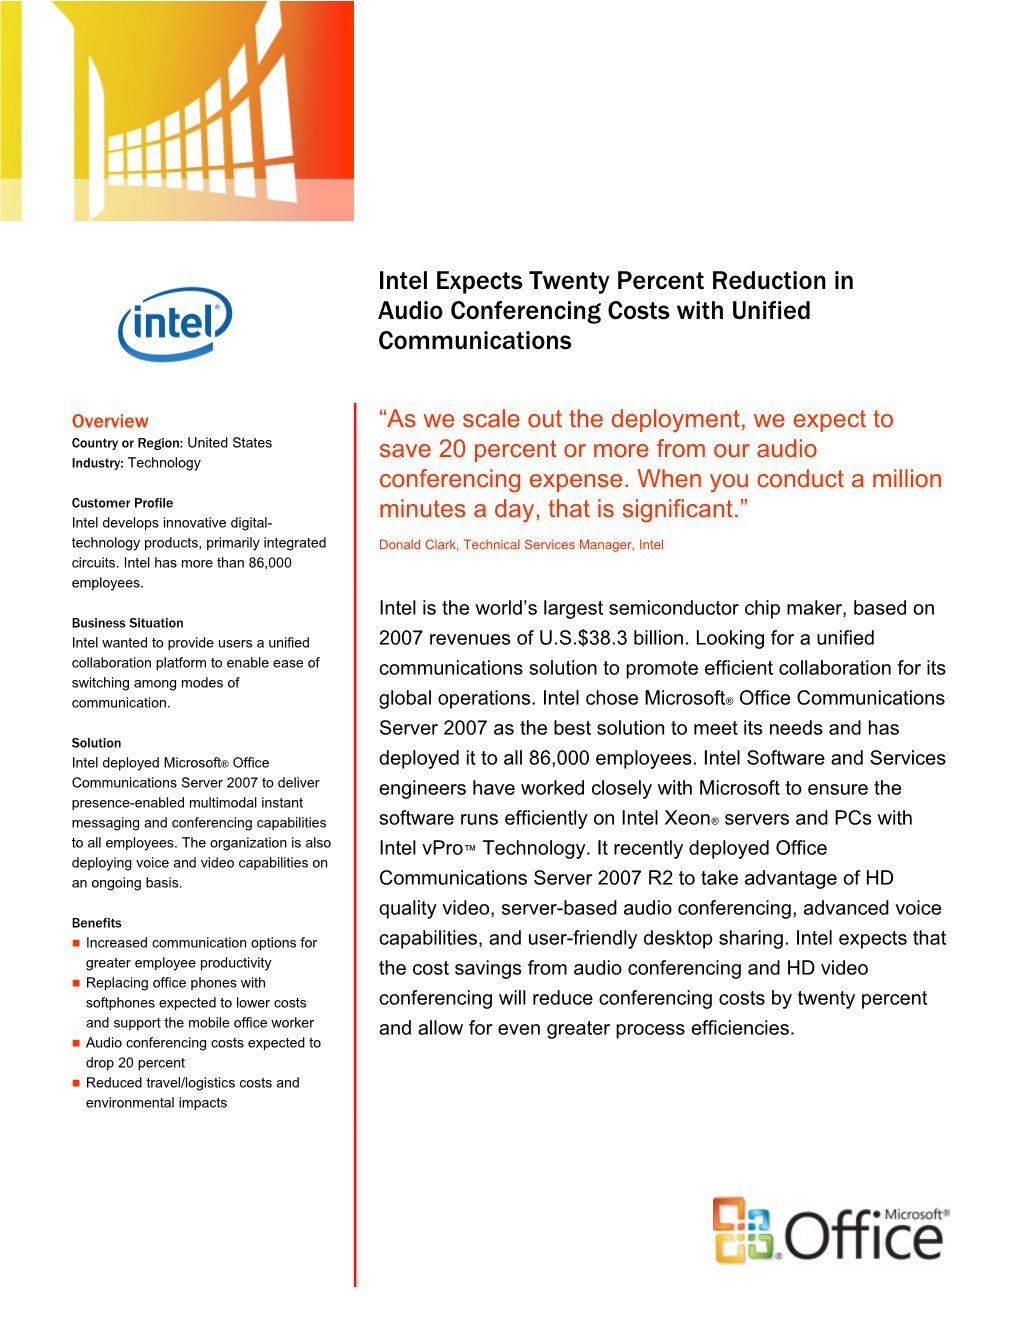 Founded in 1968 and with Revenues of U.S.$38.3 Billion, Intel Develops Advanced, Integrated